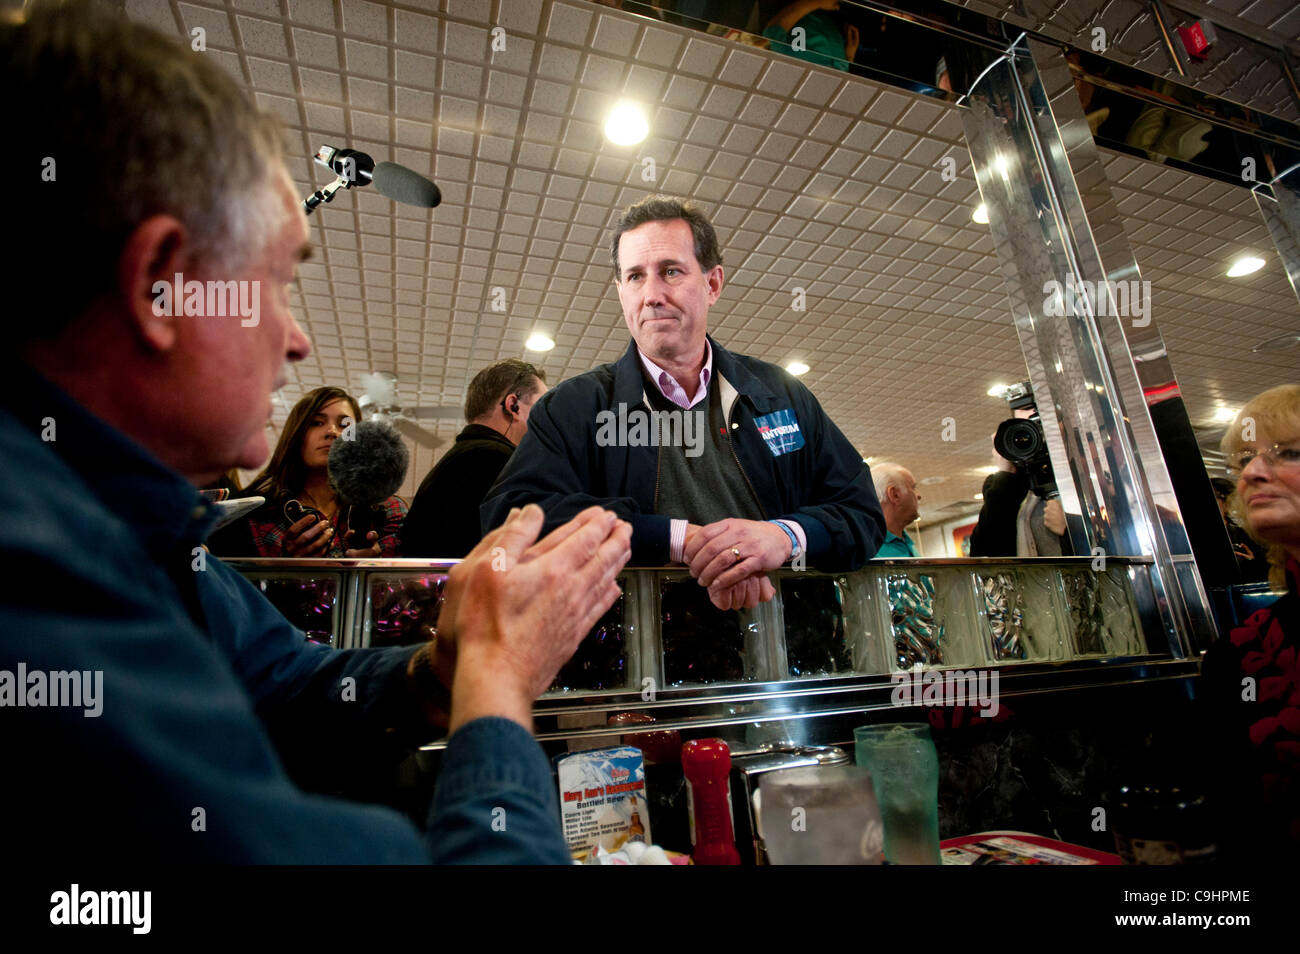 Derry, NH, Unites States - 1/9/12 -   Former Senator Rick Santorum speaks to diners at Mary Ann's Diner during a campaign stop in Derry, NH January 9, 2012, as he campaigns for the Republican nomination for President prior to the New Hampshire Primary.     (Photo by Gordon M. Grant) Stock Photo